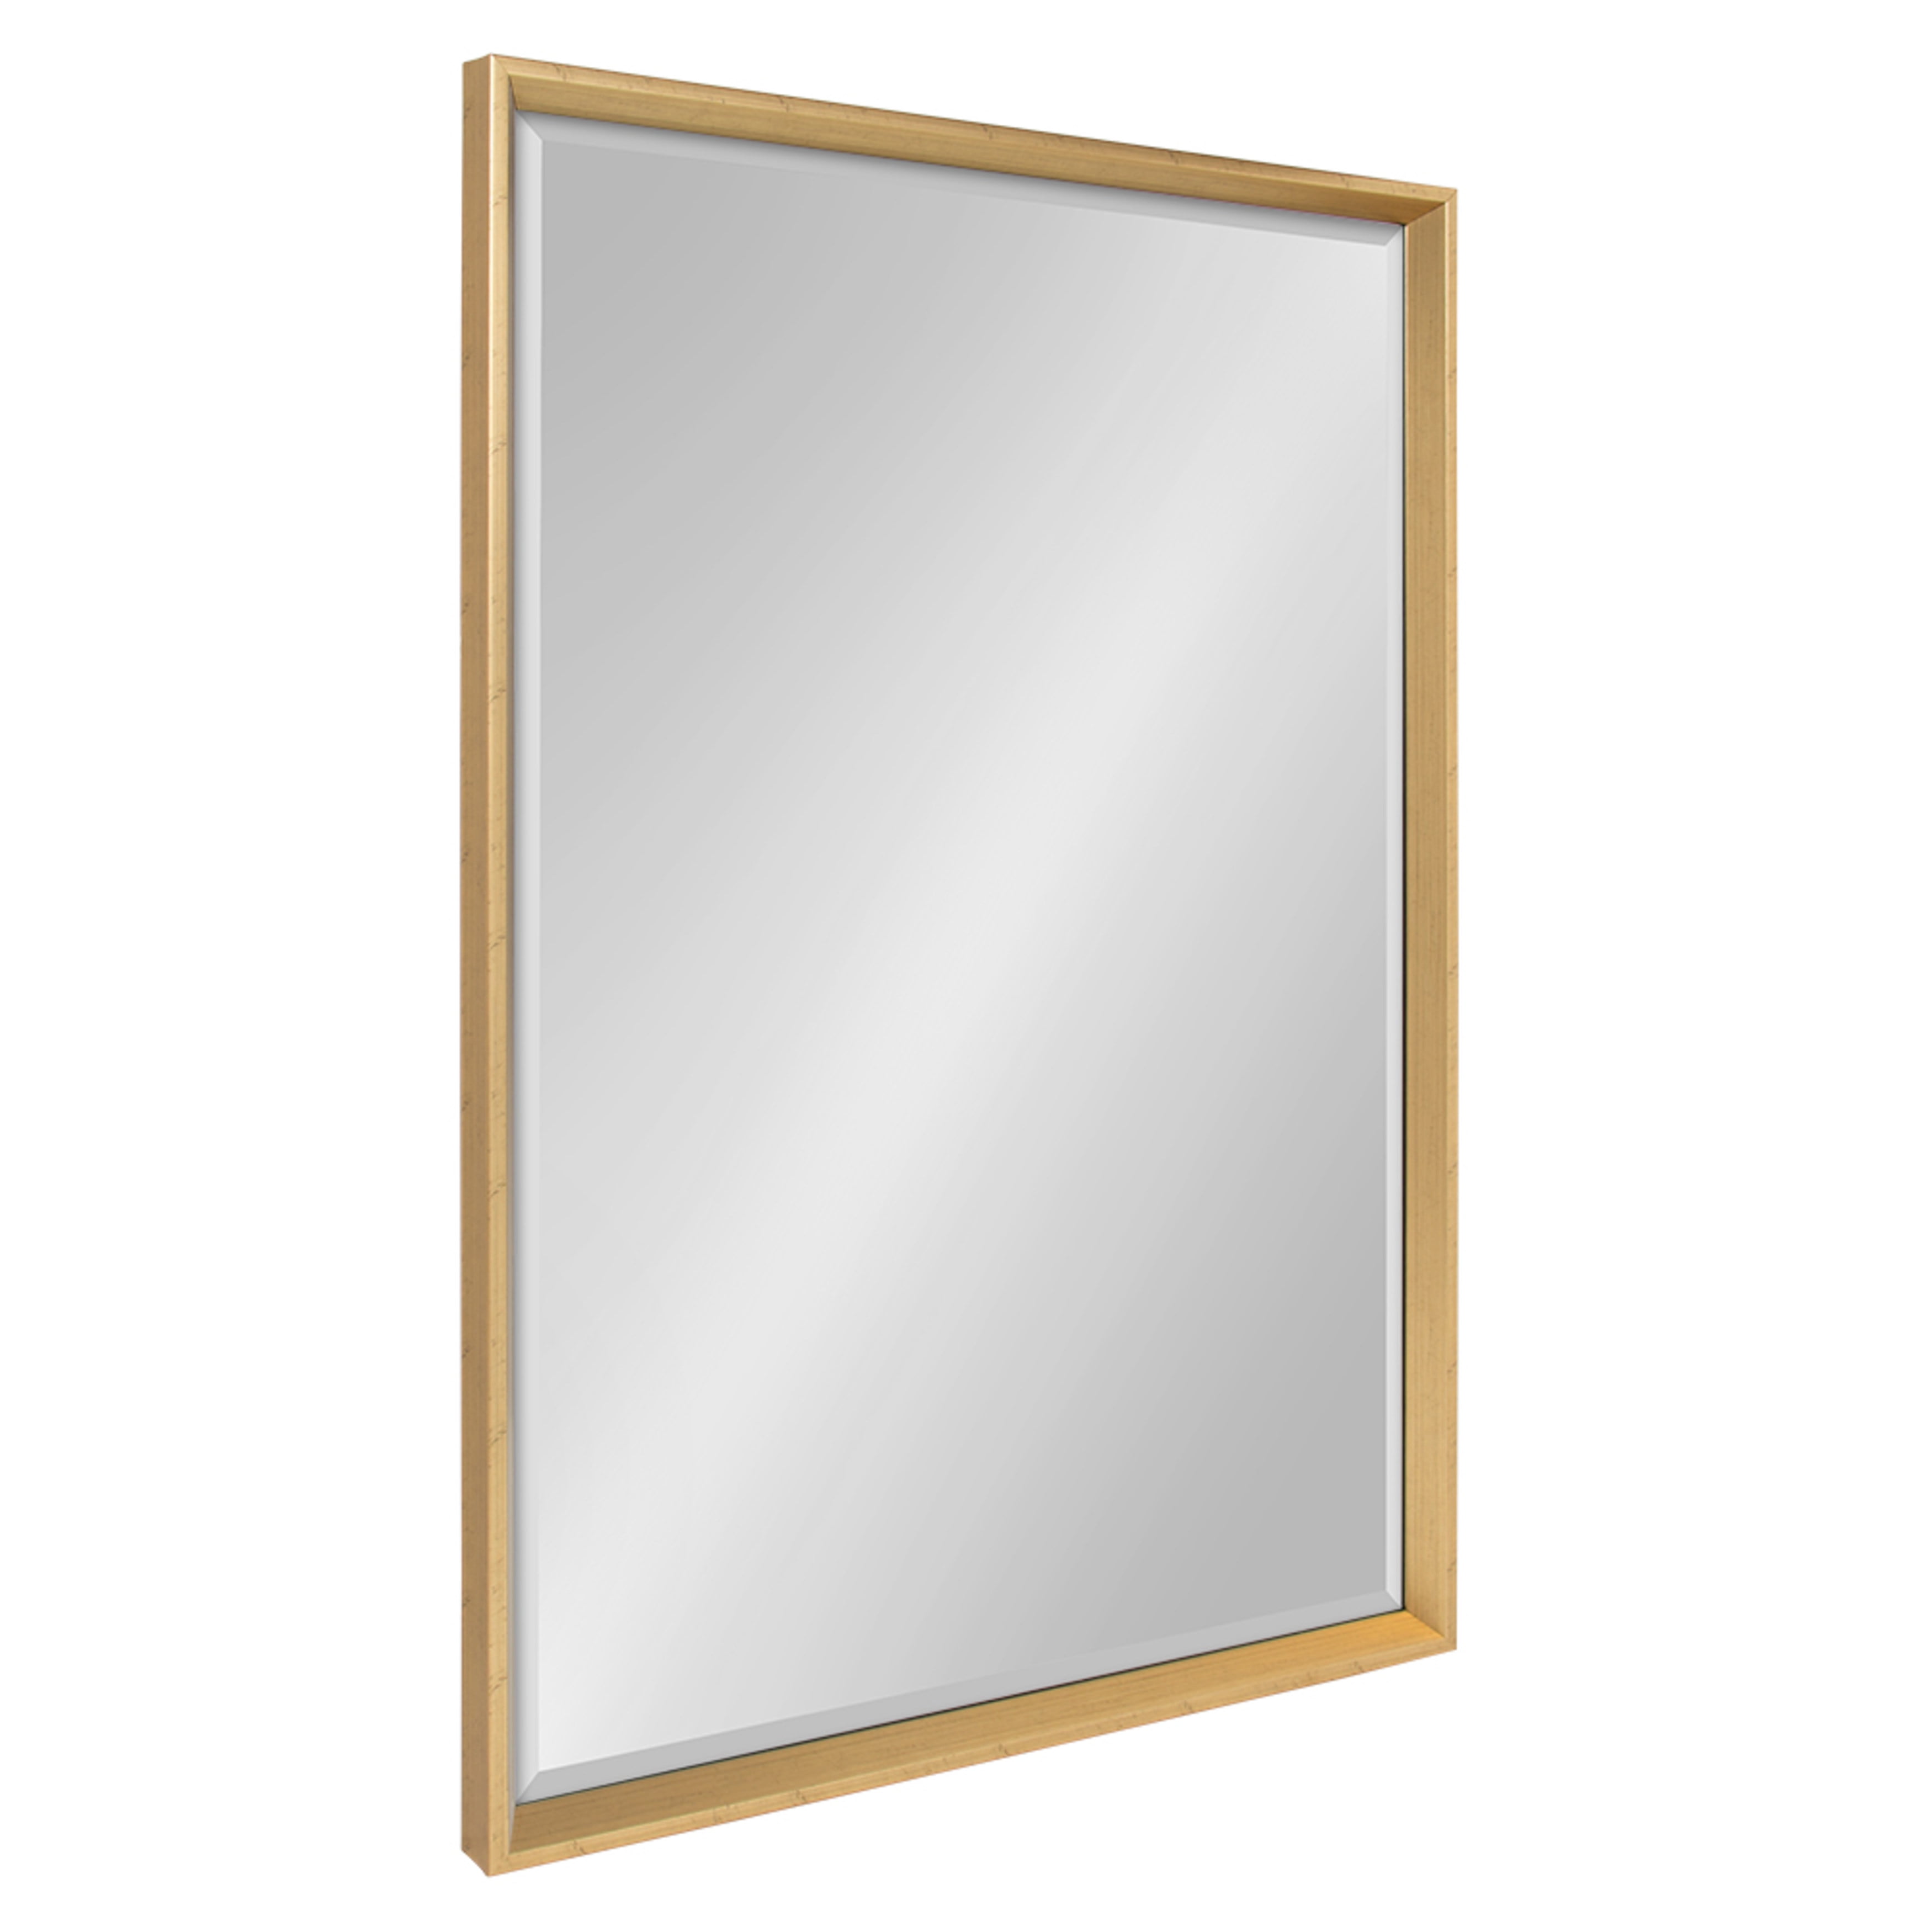 Kate and Laurel Calter Modern Decorative Framed Beveled Wall Mirror, 19.5x25.5 White - 4